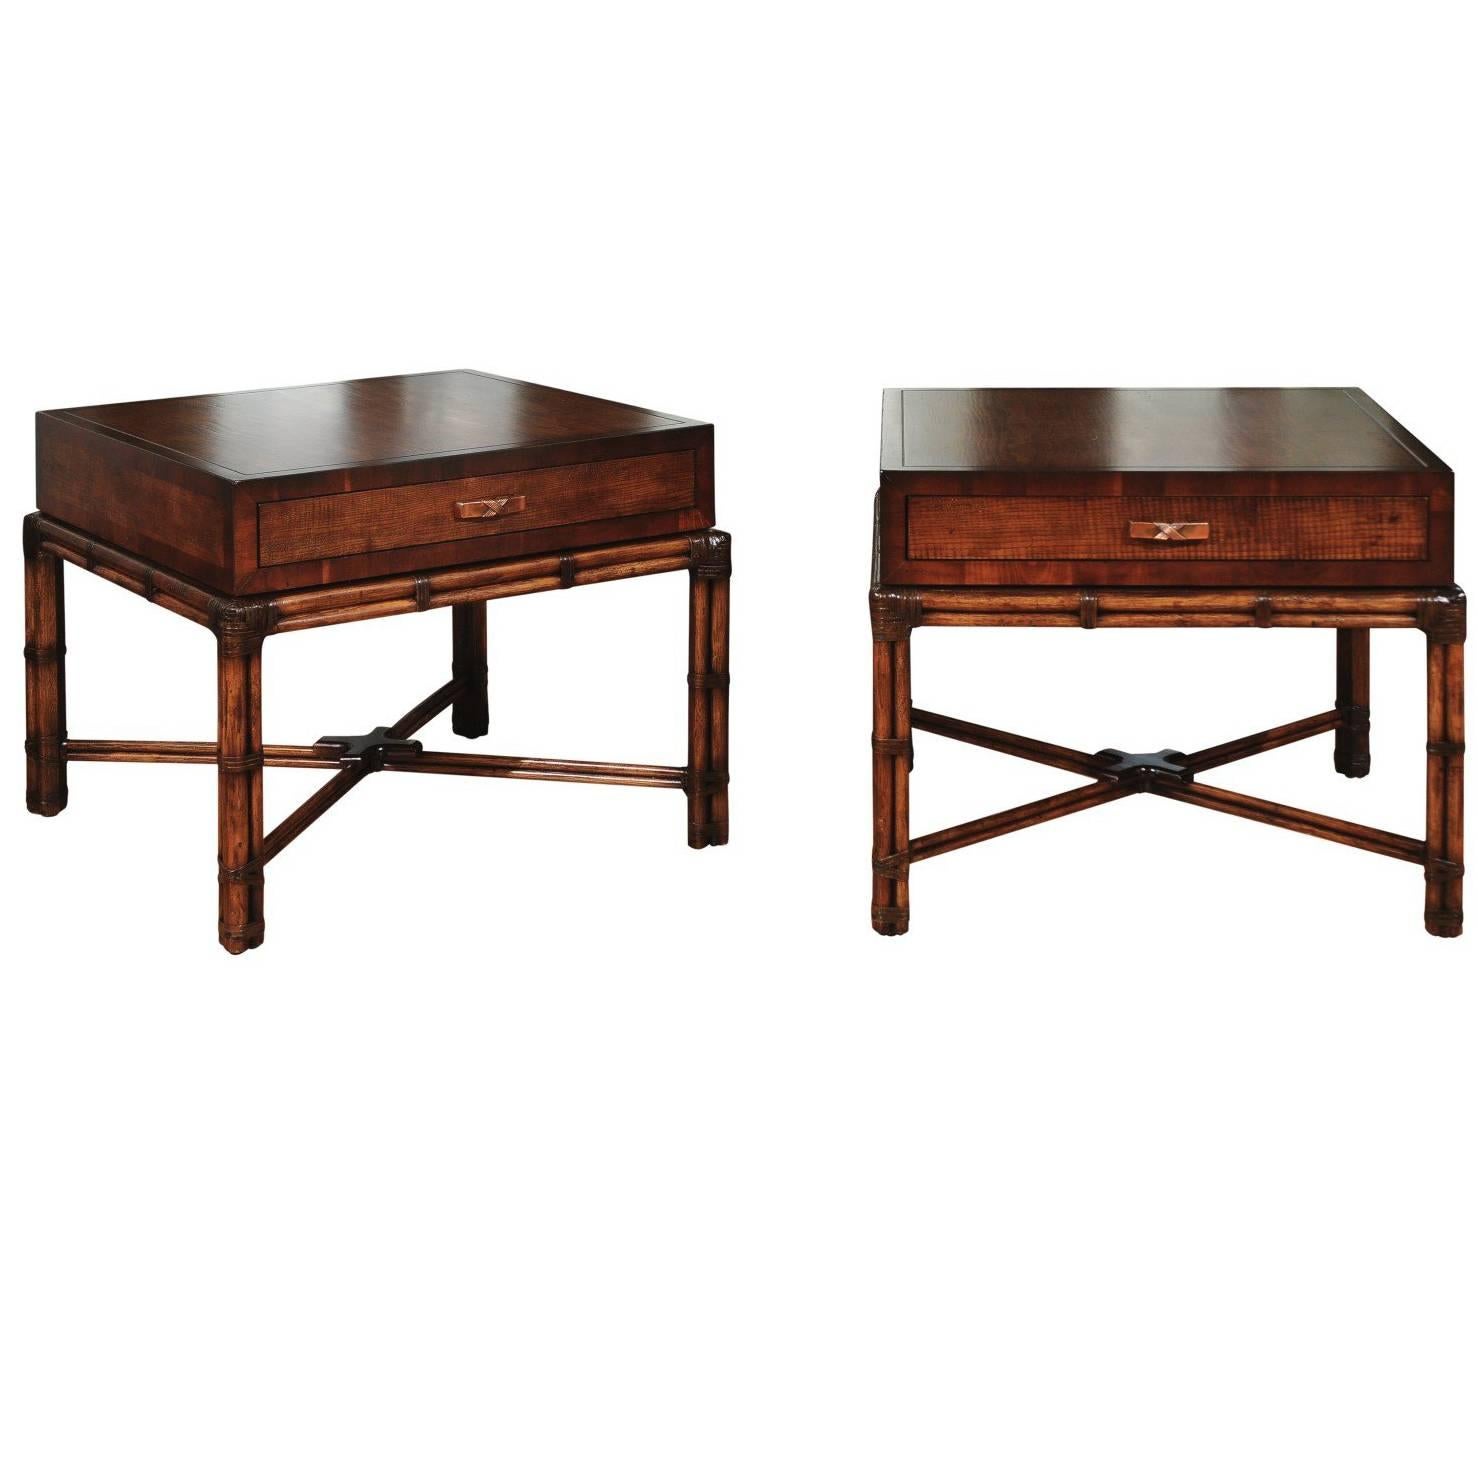 Beautiful Restored Pair of Large-Scale Vintage Campaign End Tables by Henredon For Sale